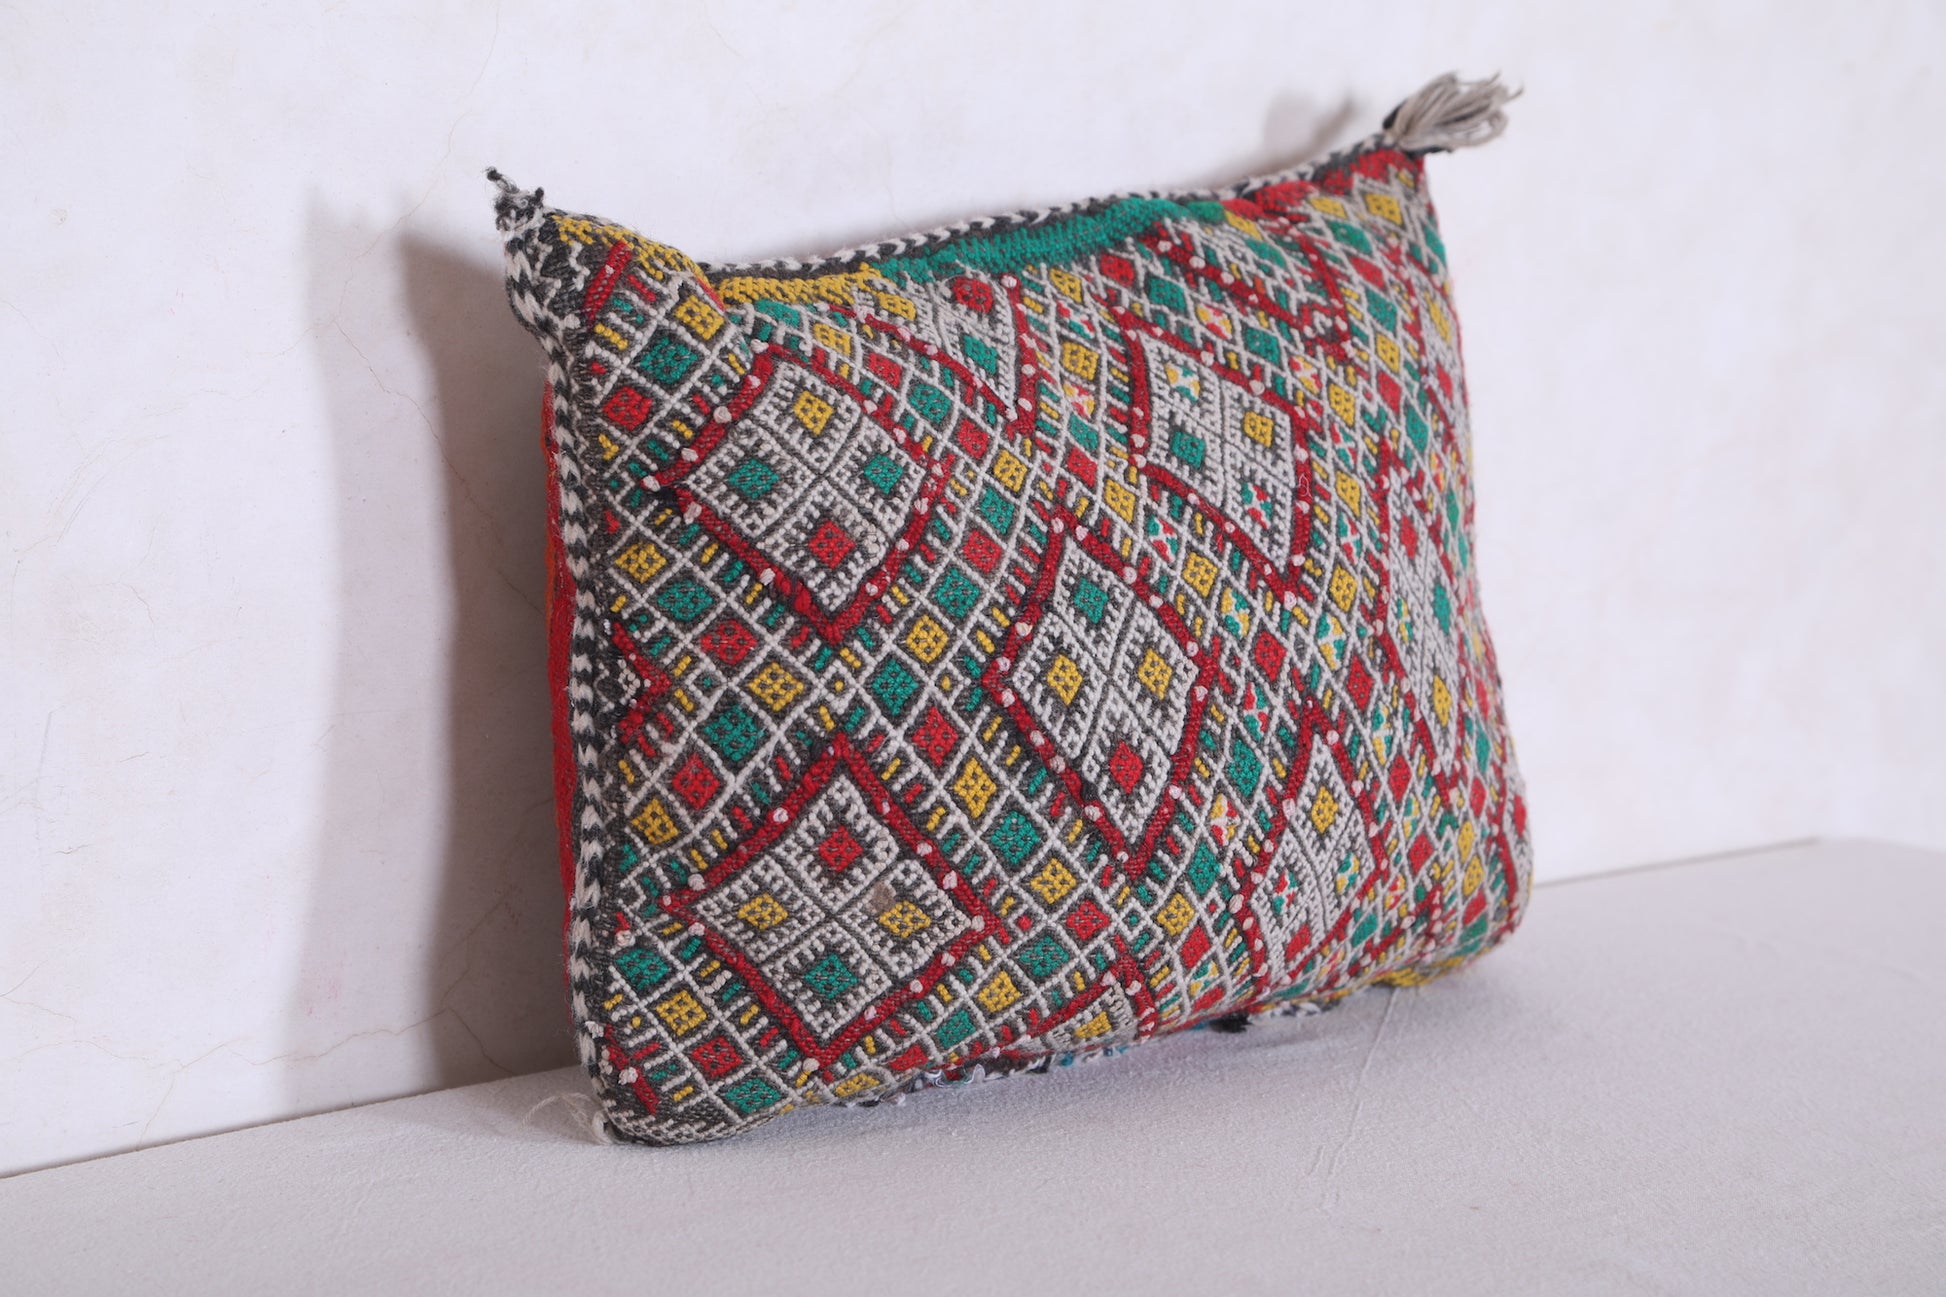 Moroccan handmade kilim pillow 12.5 INCHES X 16.1 INCHES